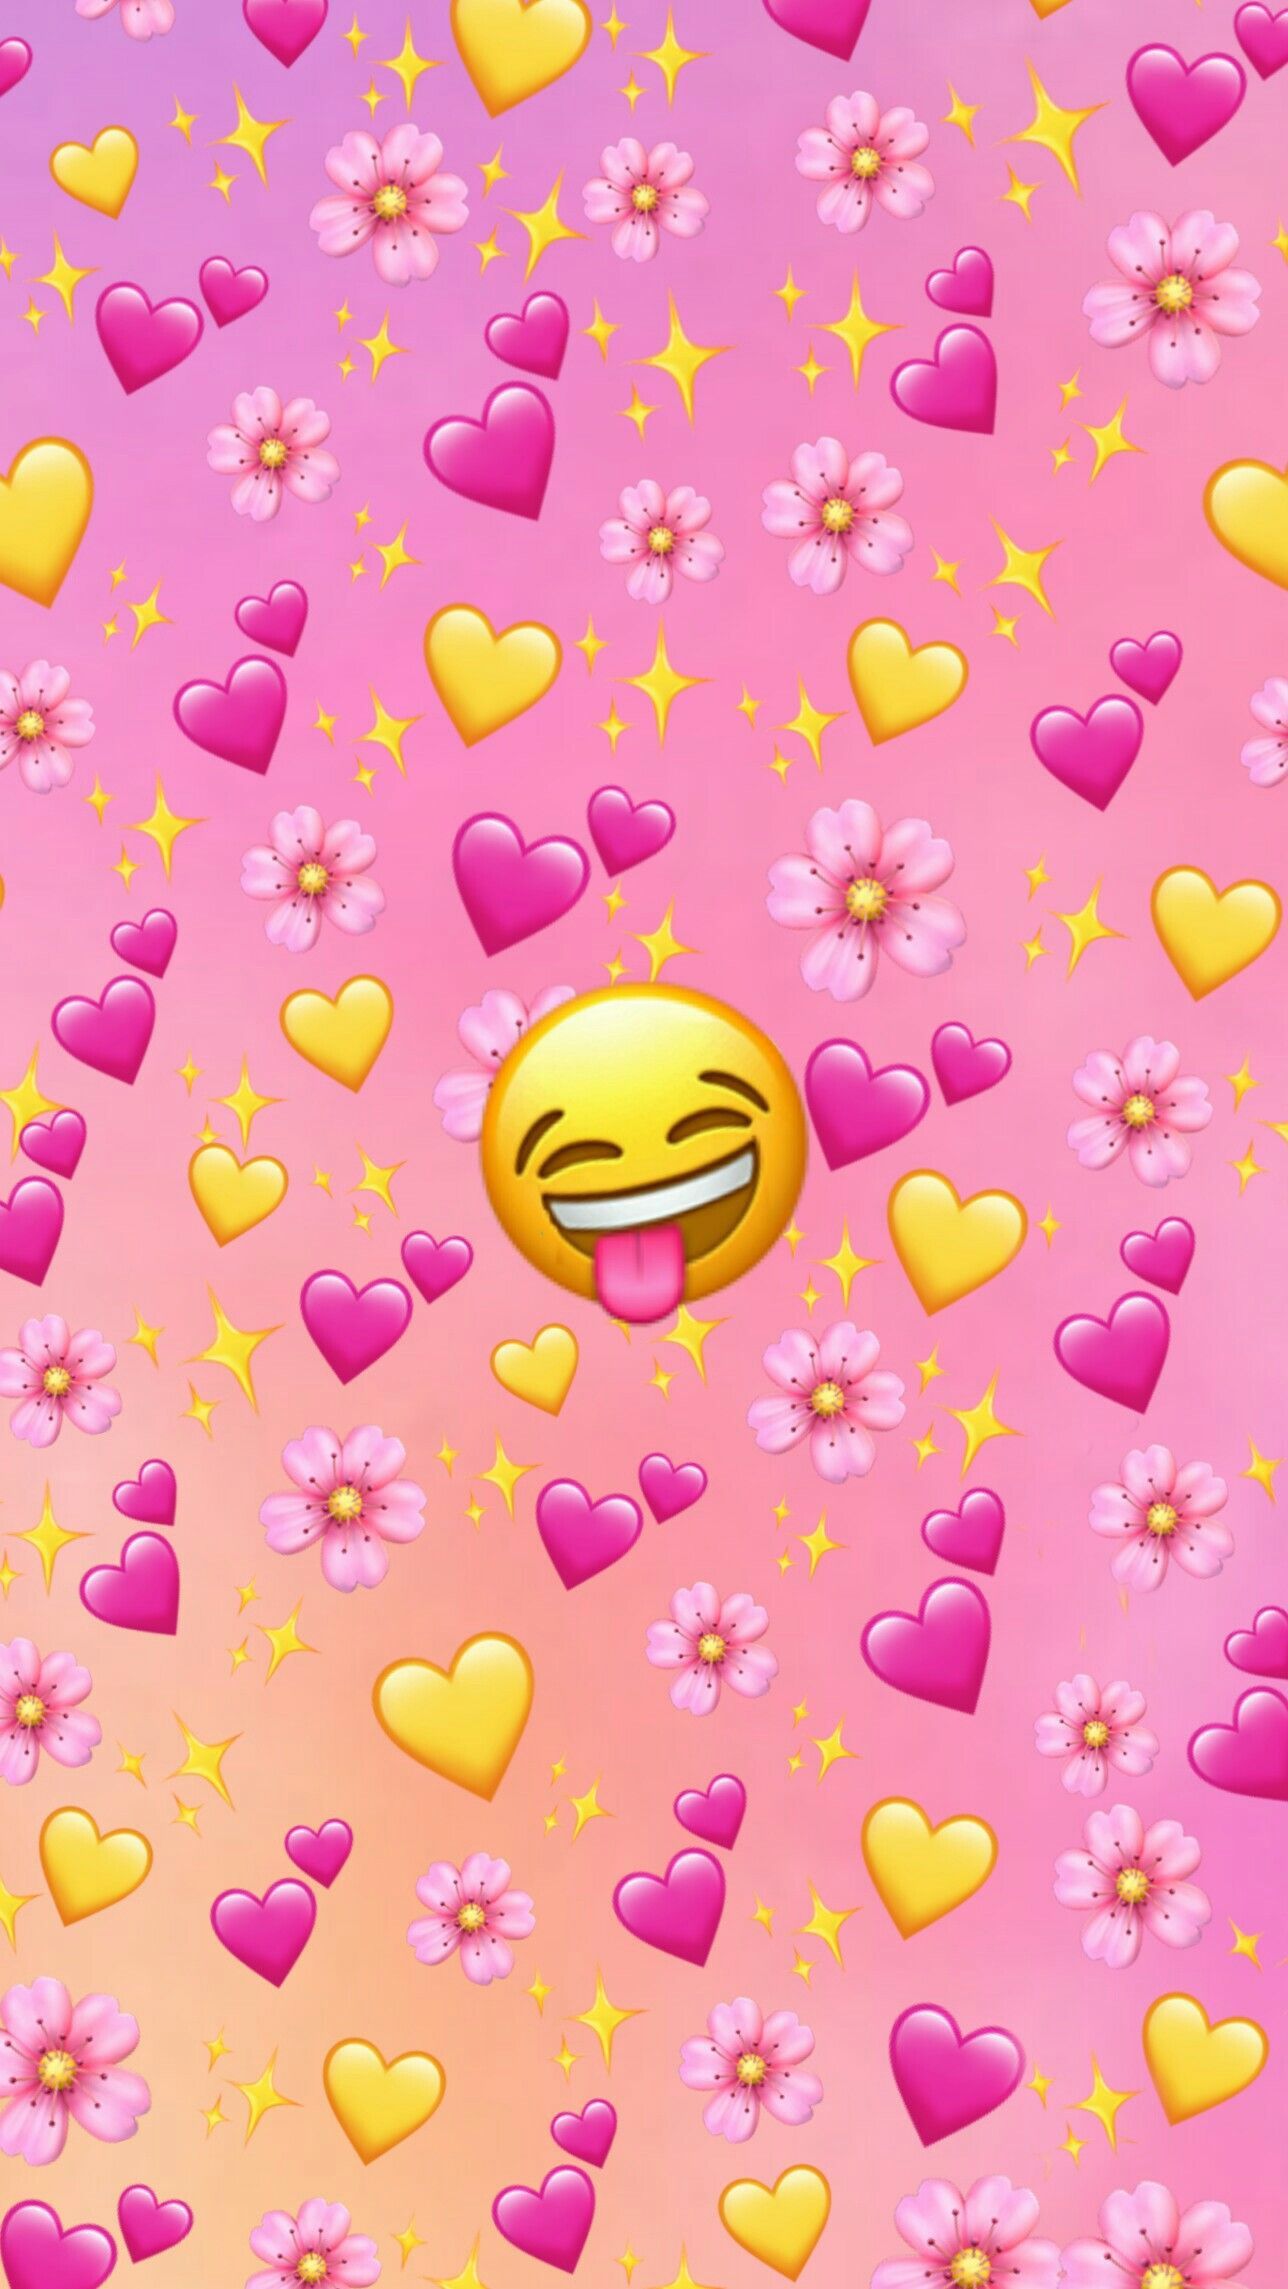 A pink and yellow background with hearts - Emoji